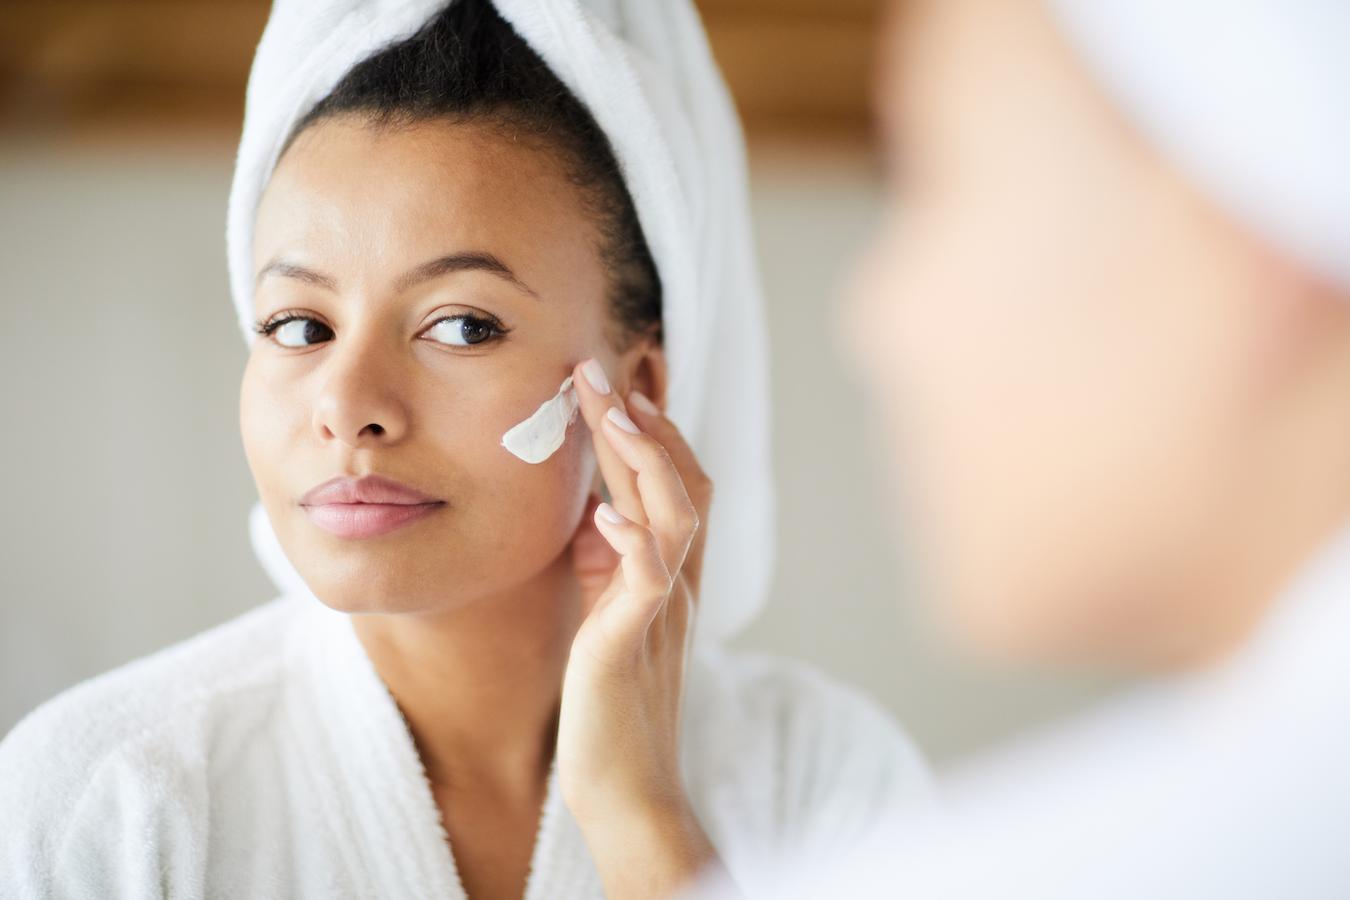 Eye creams are essential skin care products